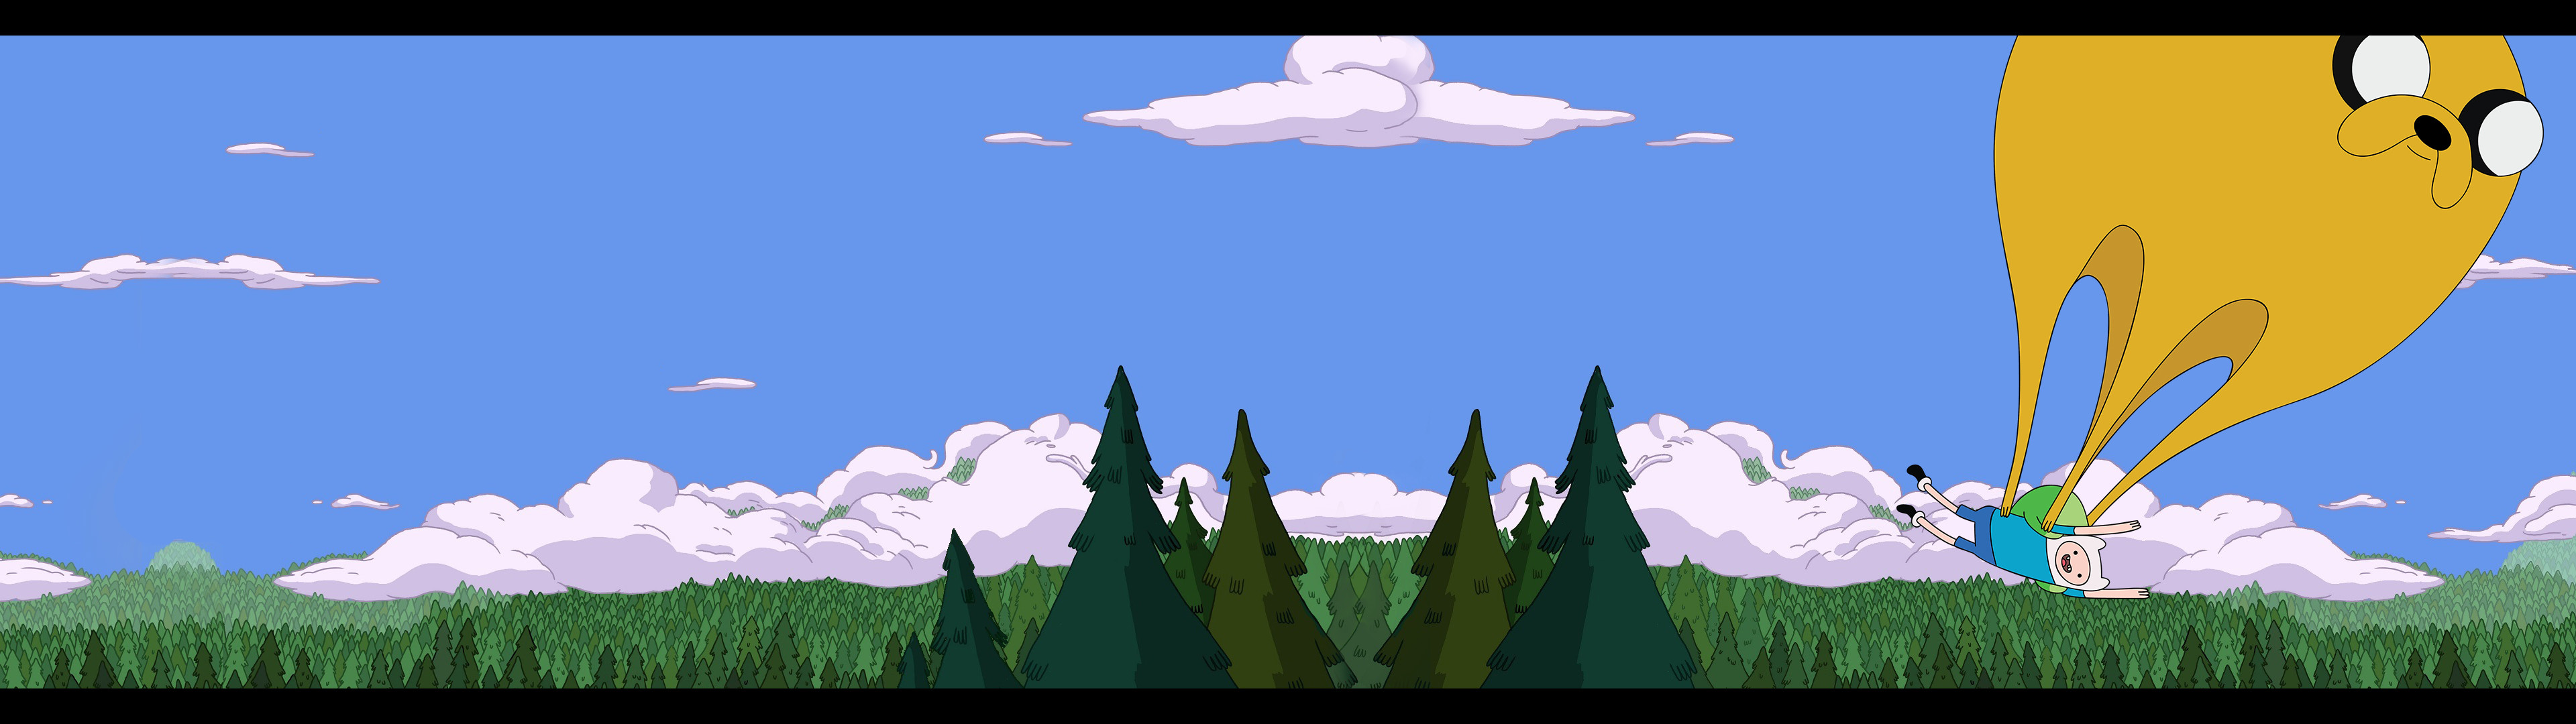 3840x1080 Adventure time dual-monitors wallpaper by PixelatedSailor on .